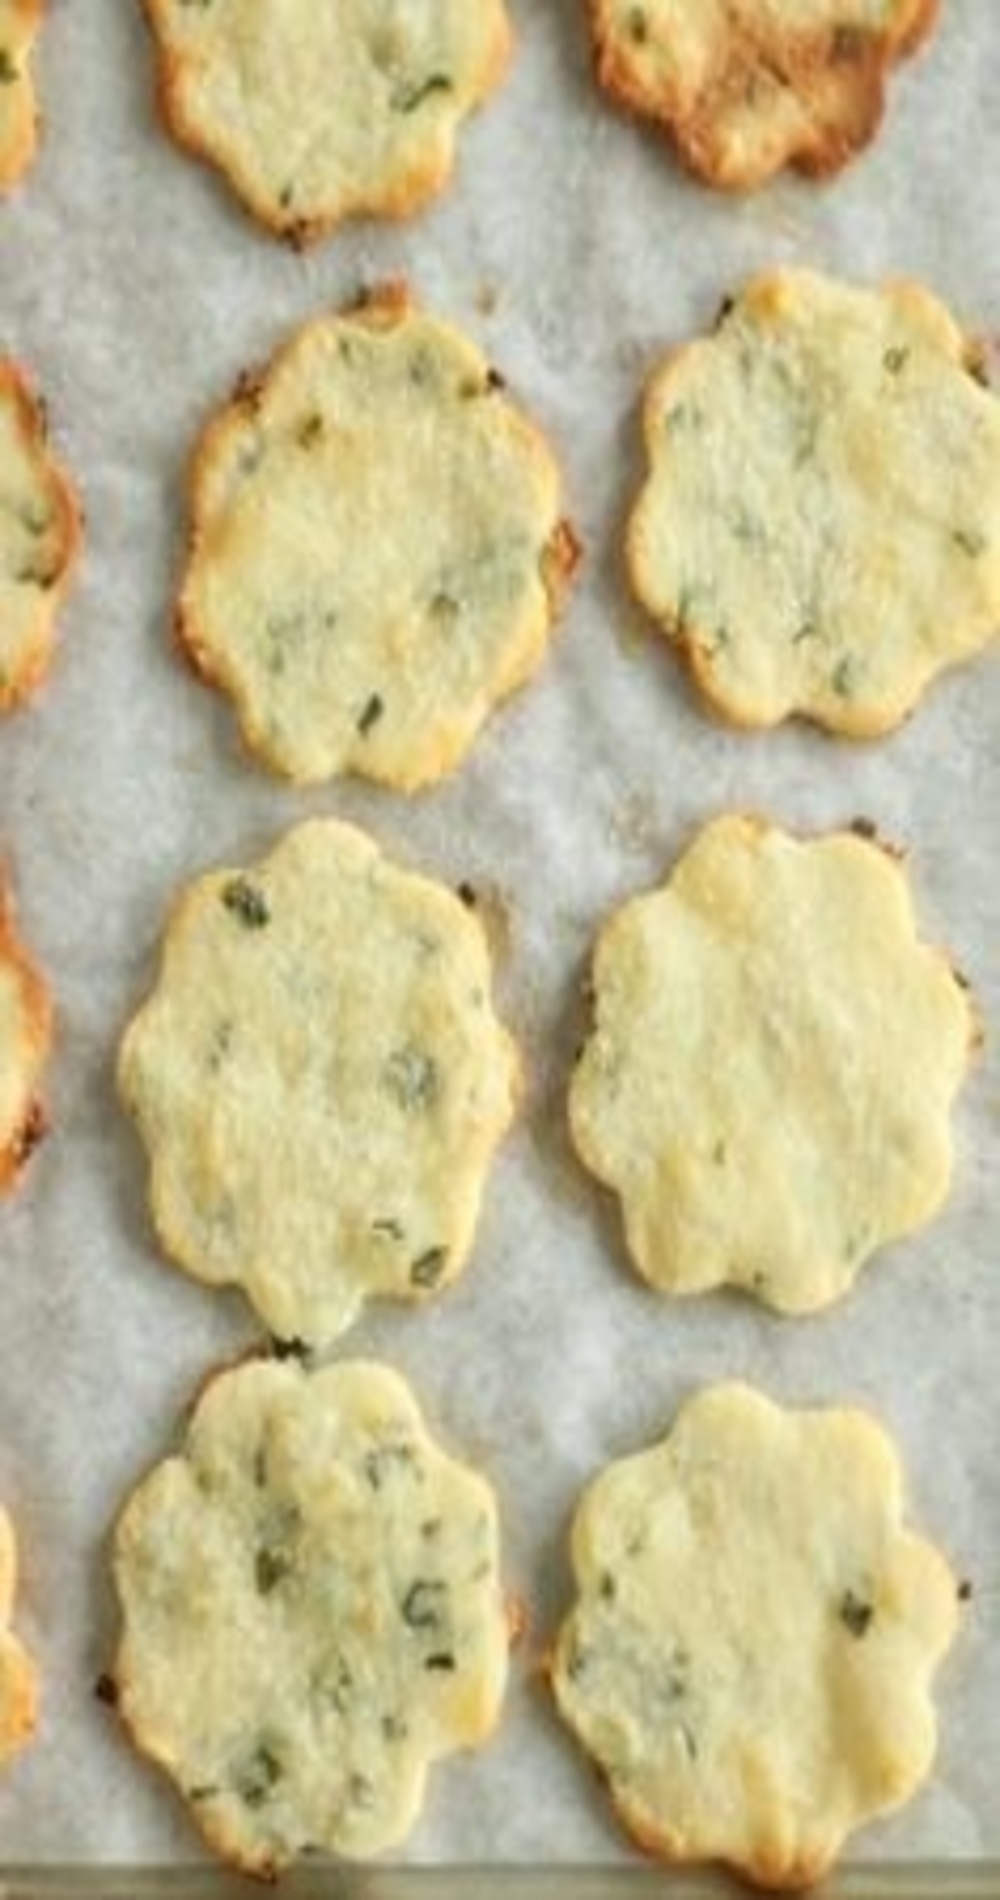 Keto Sour Cream and Chive Crackers